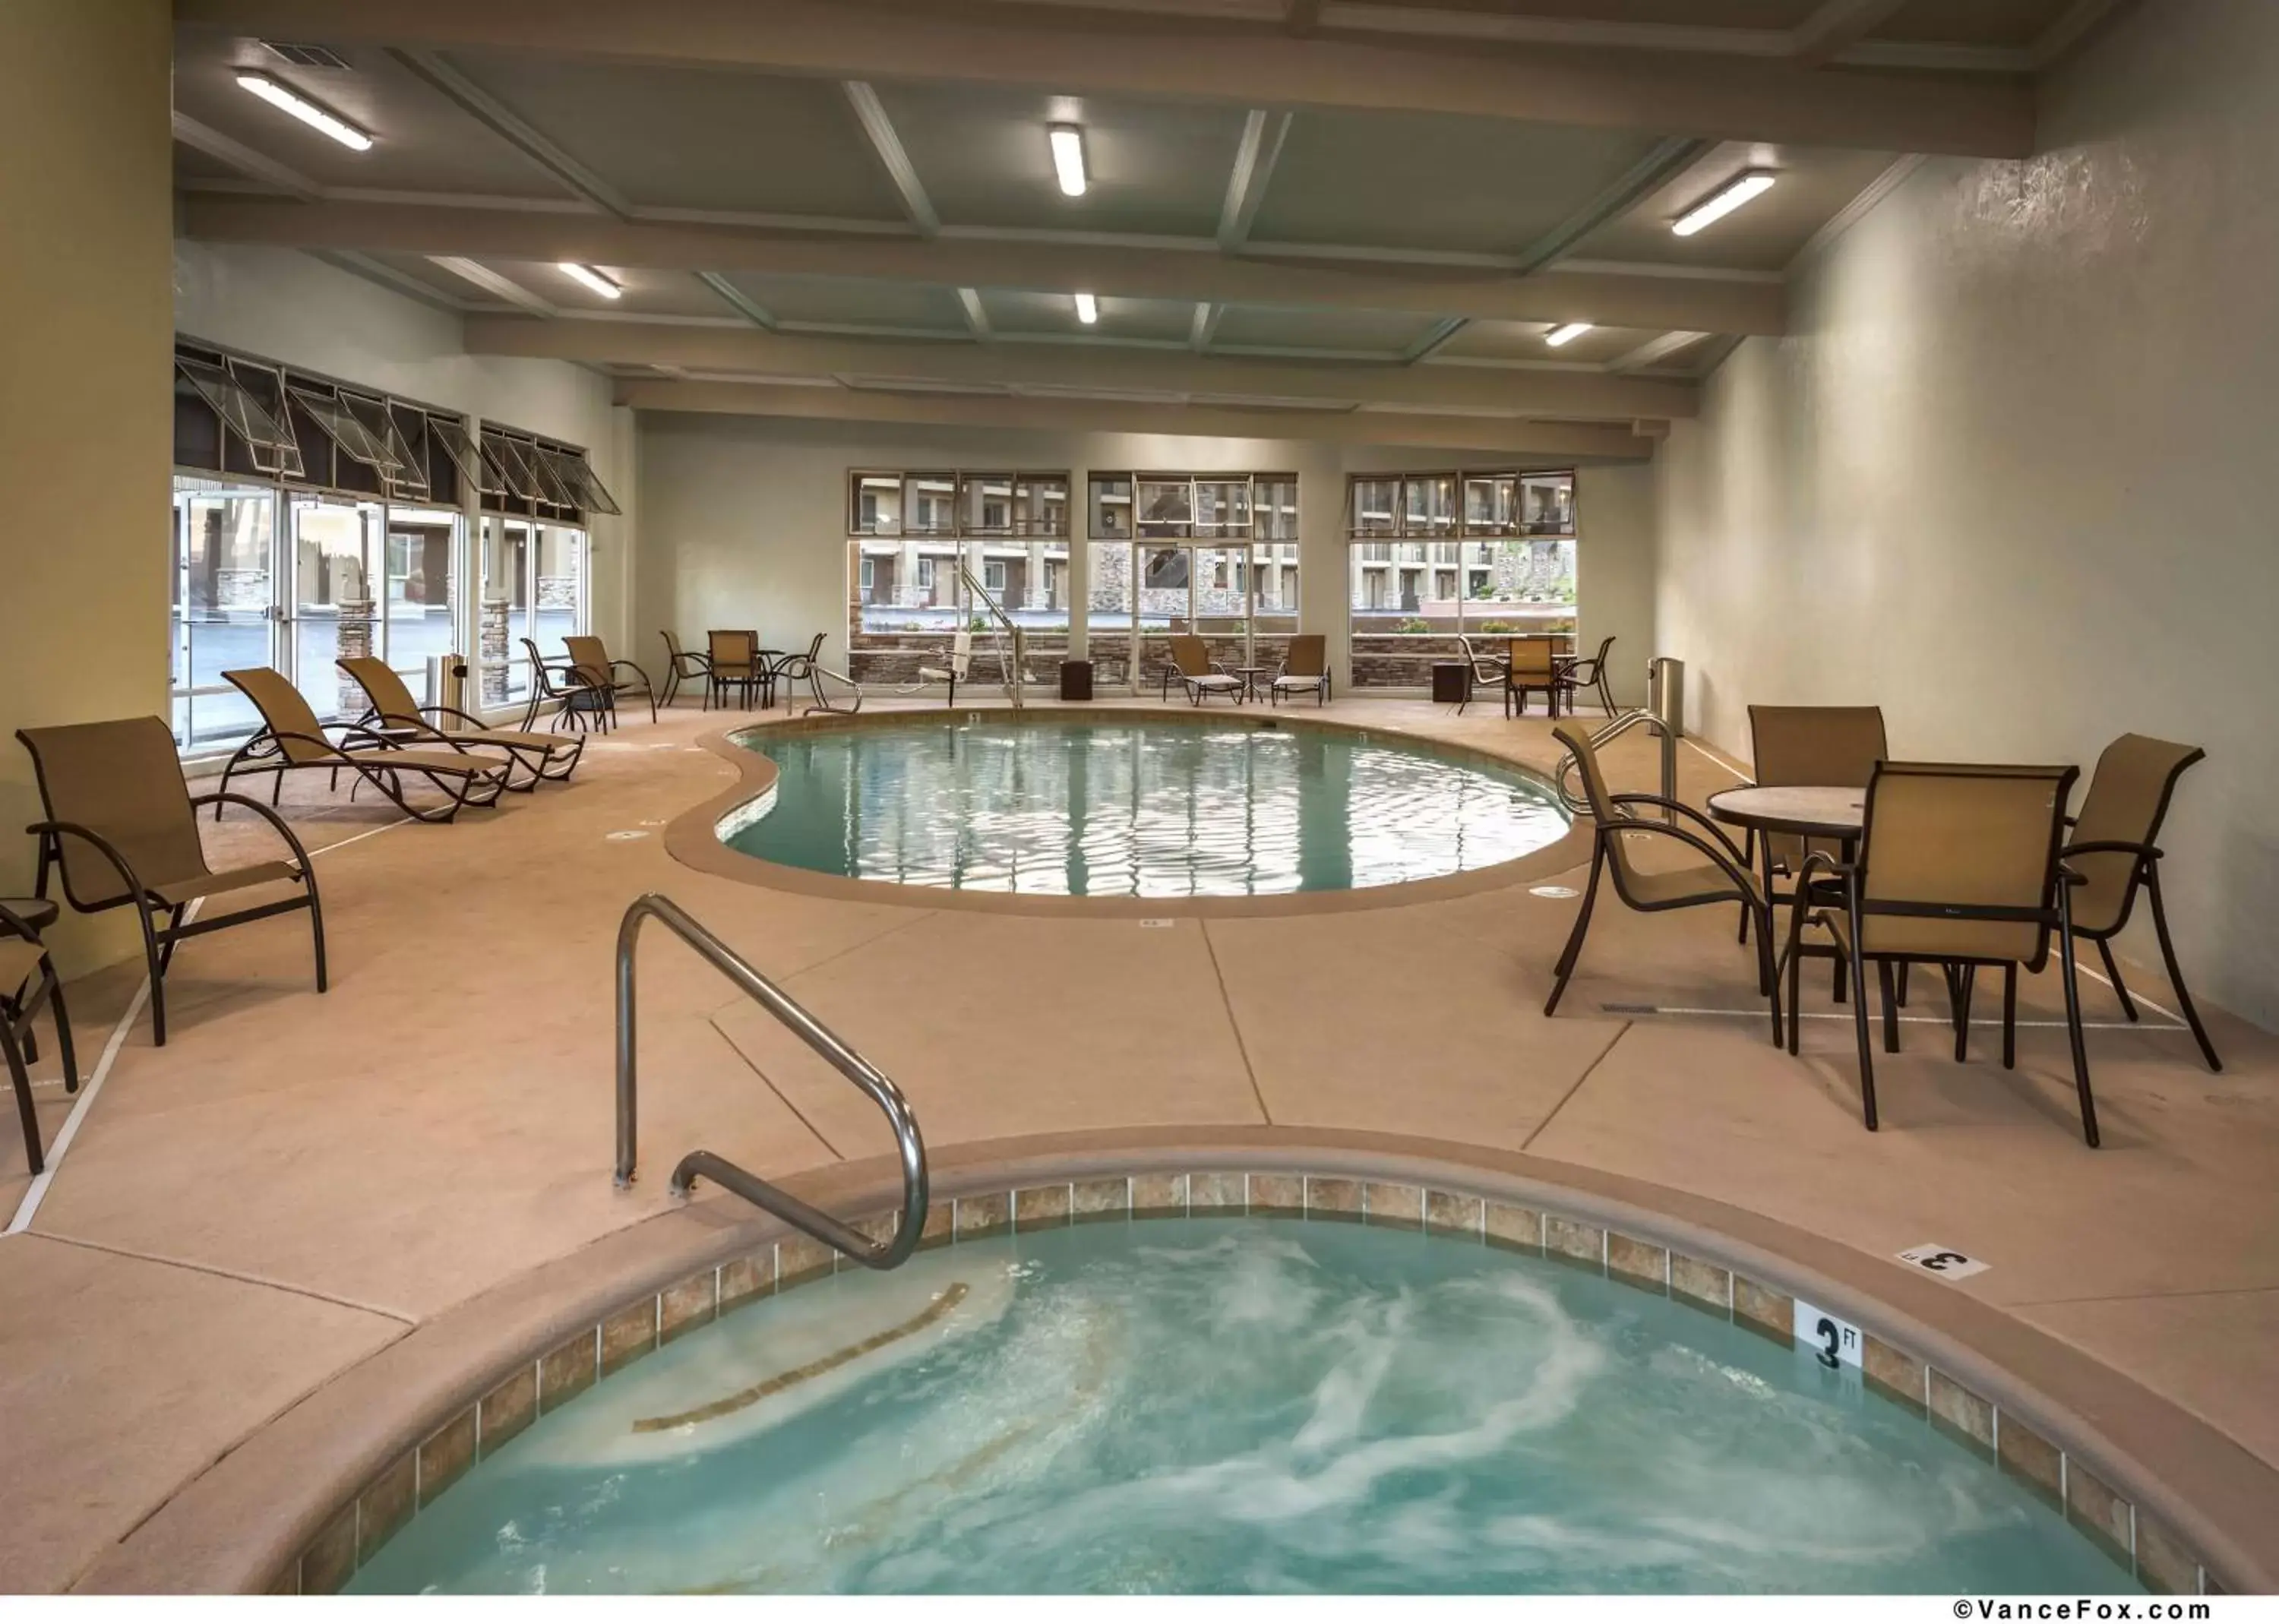 On site, Swimming Pool in Best Western Hoover Dam Hotel